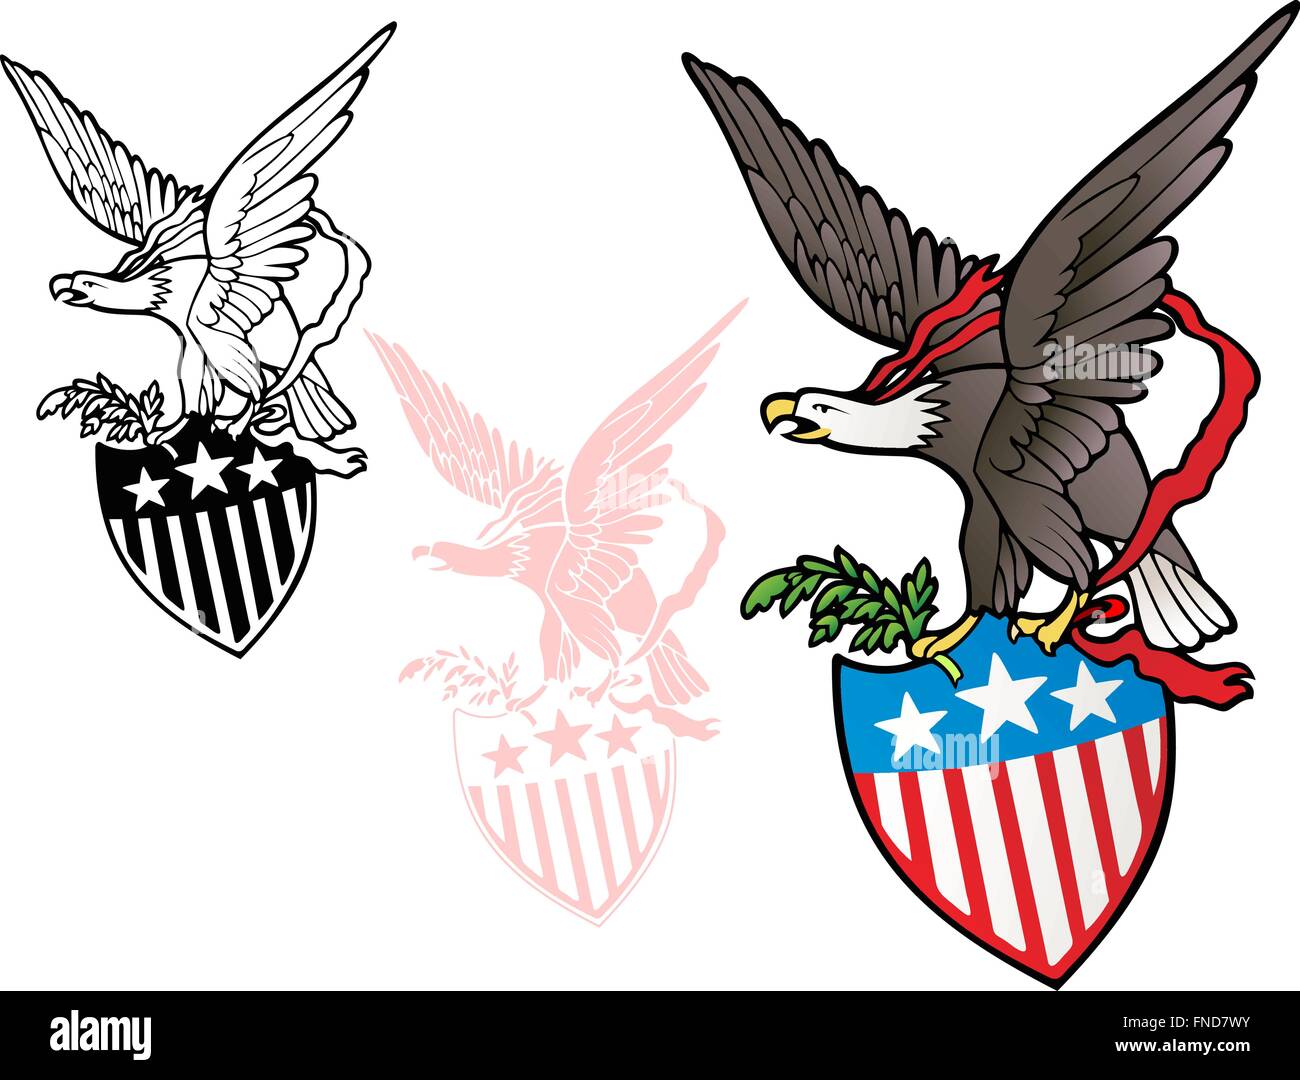 Patriotic emblem, eagle with stars and stripes shield Stock Vector